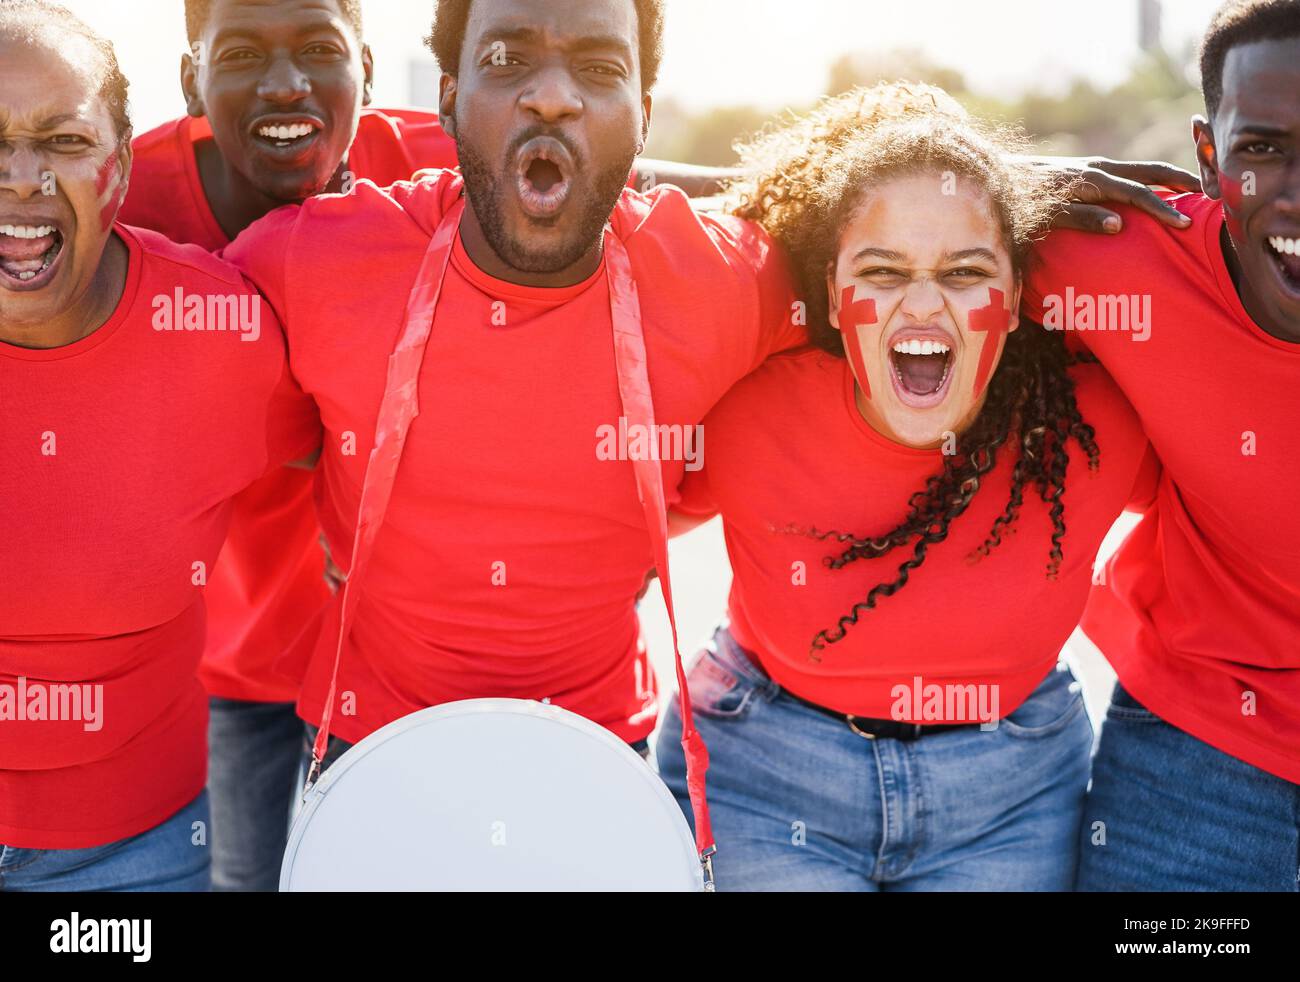 African red sport fans screaming while supporting their team - Football supporters having fun at competition event - Focus on curvy girl face Stock Photo